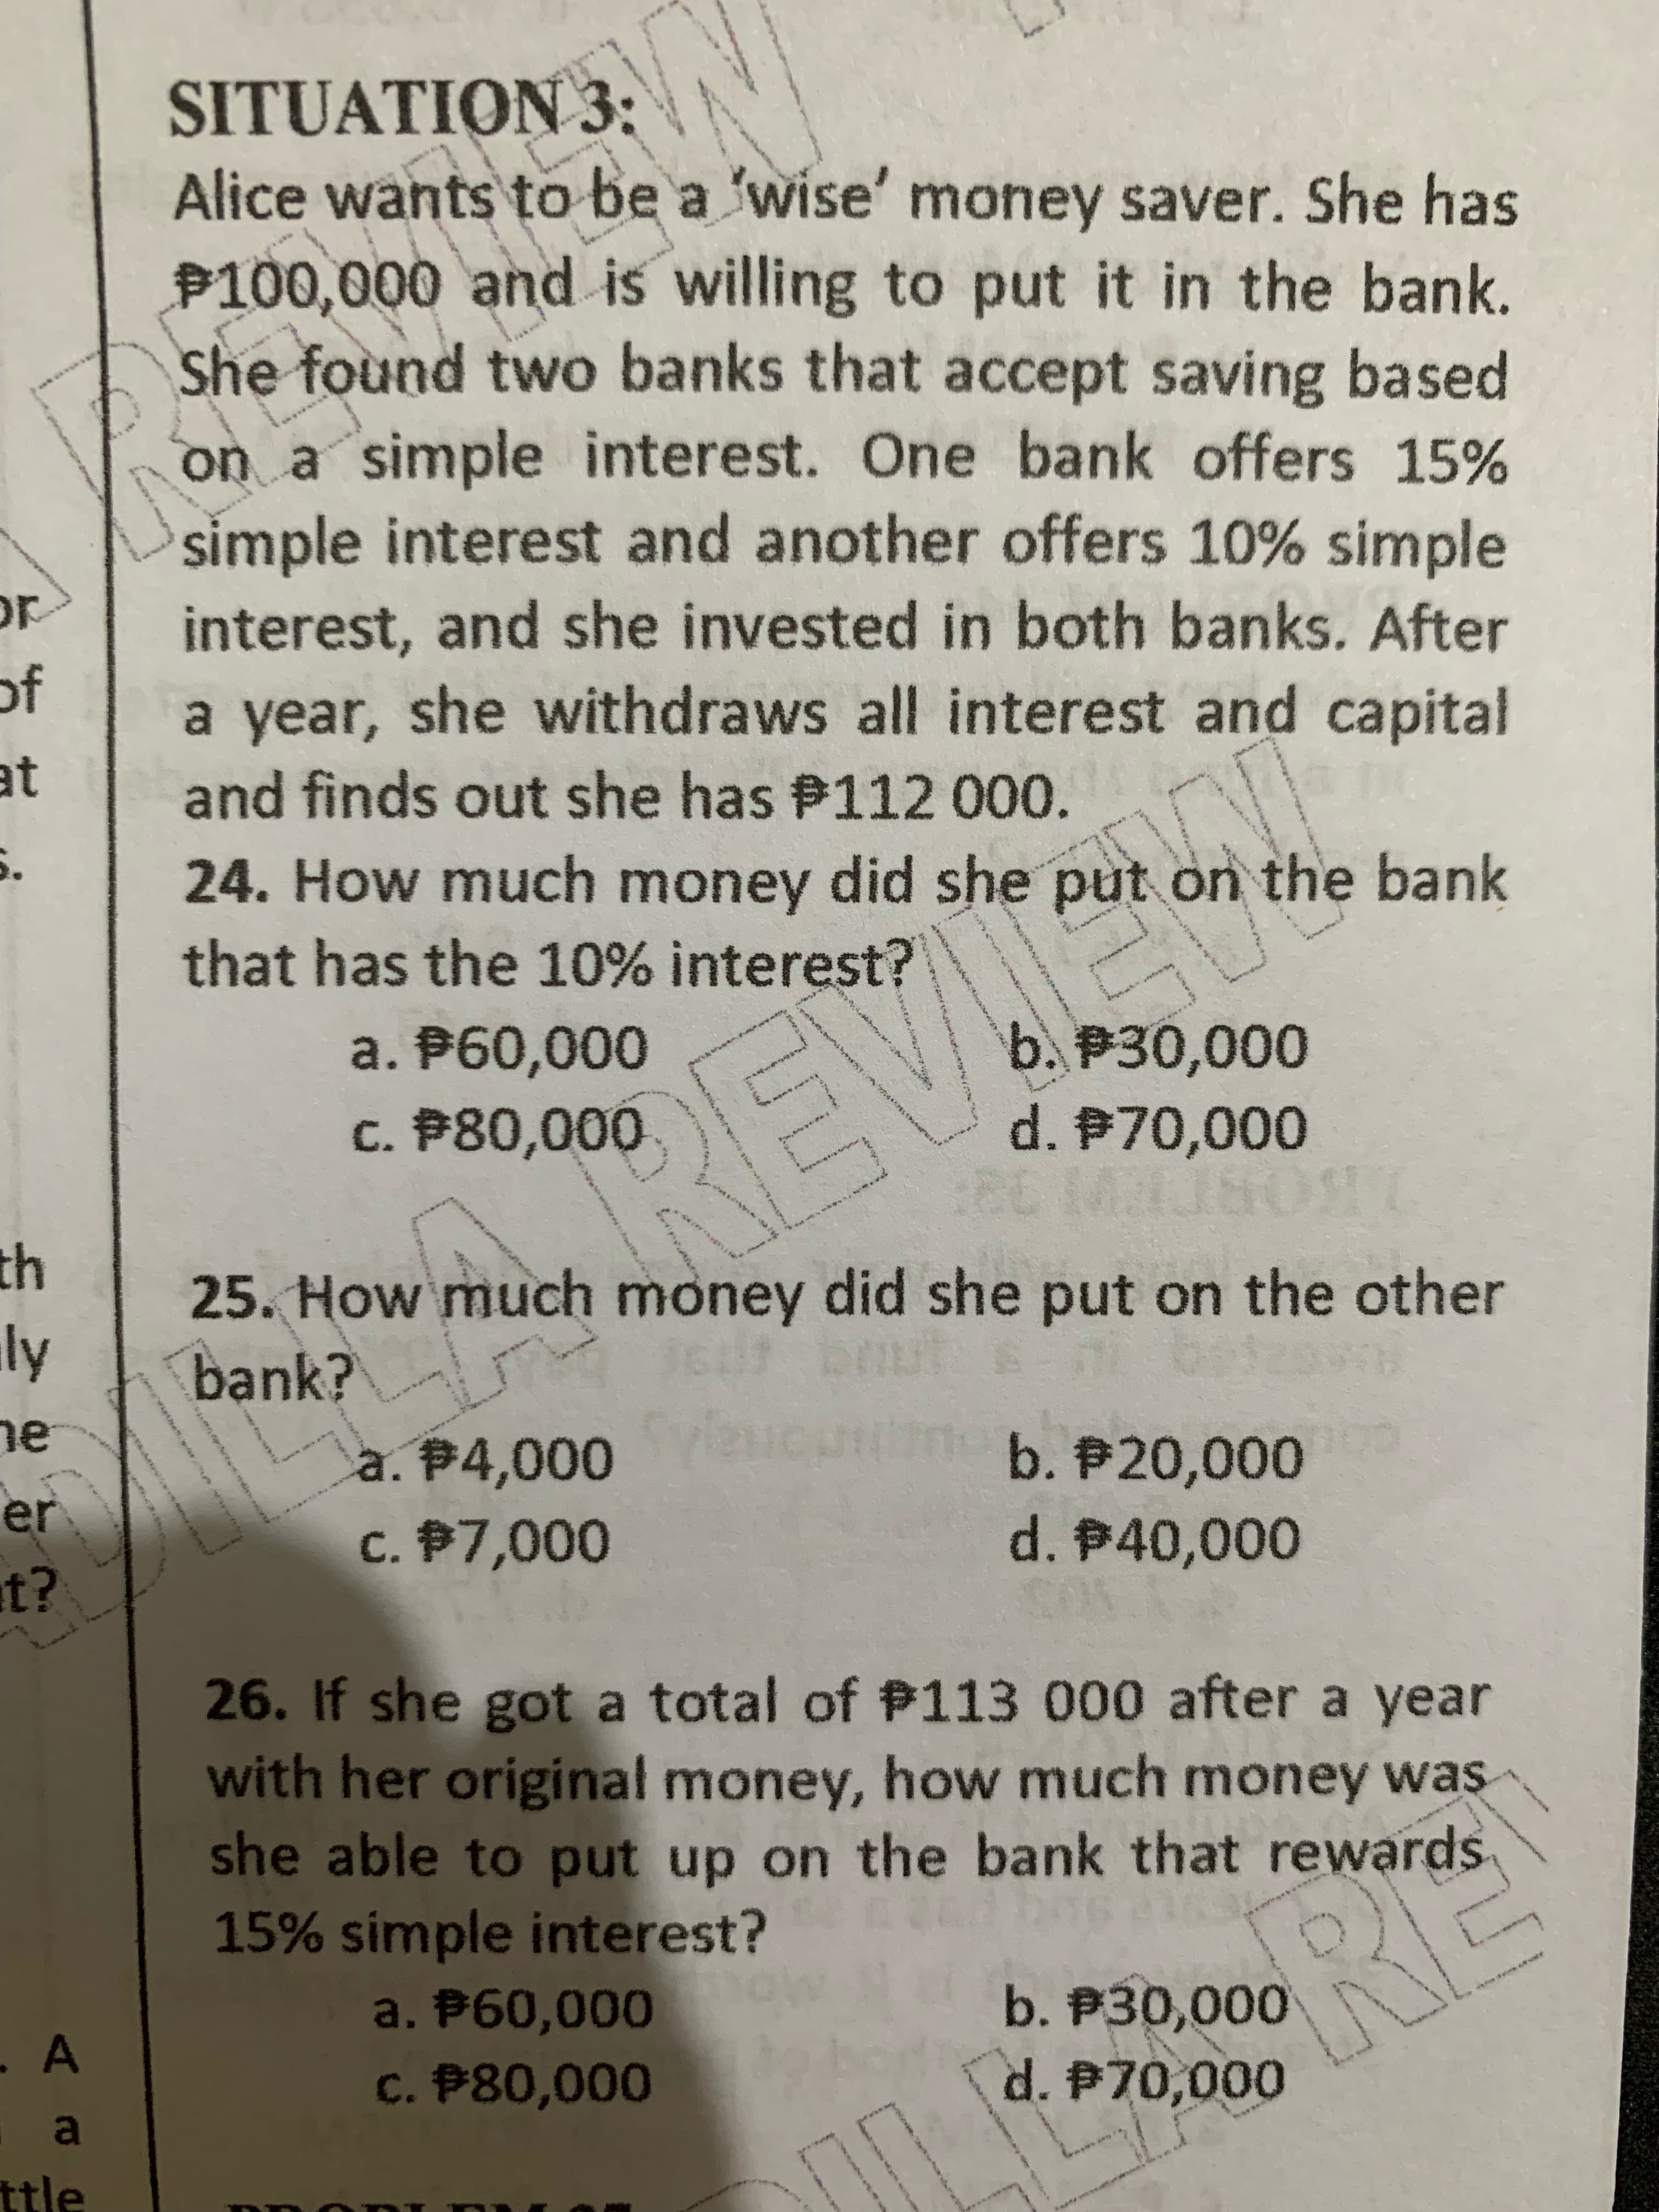 SITUATION 3:
Alice wants to be a 'wise' money saver. She has
P100,000 and is willing to put it in the bank.
She found two banks that accept saving based
on a simple interest. One bank offers 15%
simple interest and another offers 10% simple
interest, and she invested in both banks. After
a year, she withdraws all interest and capital
and finds out she has P112 000.
of
at
24. How much money did she put on the bank
that has the 10% interest?
b. P30,000
d. P70,000
a. P60,000
c. P80,000
41
25. How much money did she put on the other
bank?
ne
b. P20,000
d. B40,000
a. P4,000
en
c. $7,000
26.1f she got a total of P113 000 after a year
with her original money, how much money was
she able to put up on the bank that rewards
15% simple interest?
0o 00
c. P80,000
d. P70,000
a
ttle
